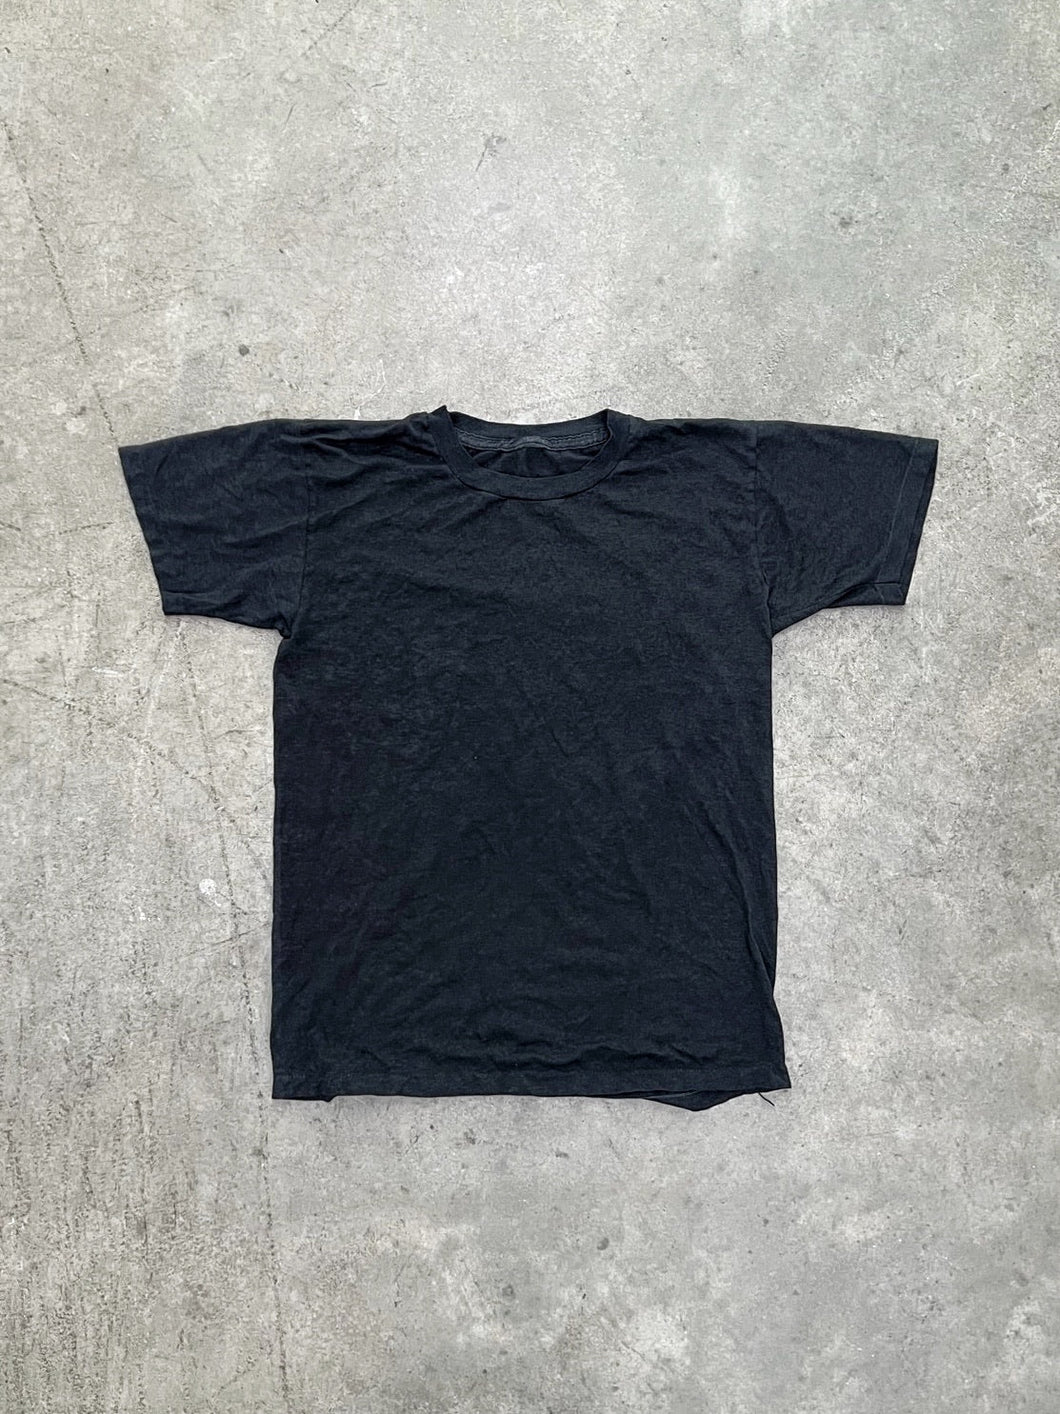 SINGLE STITCHED FADED BLACK TEE - 1980S